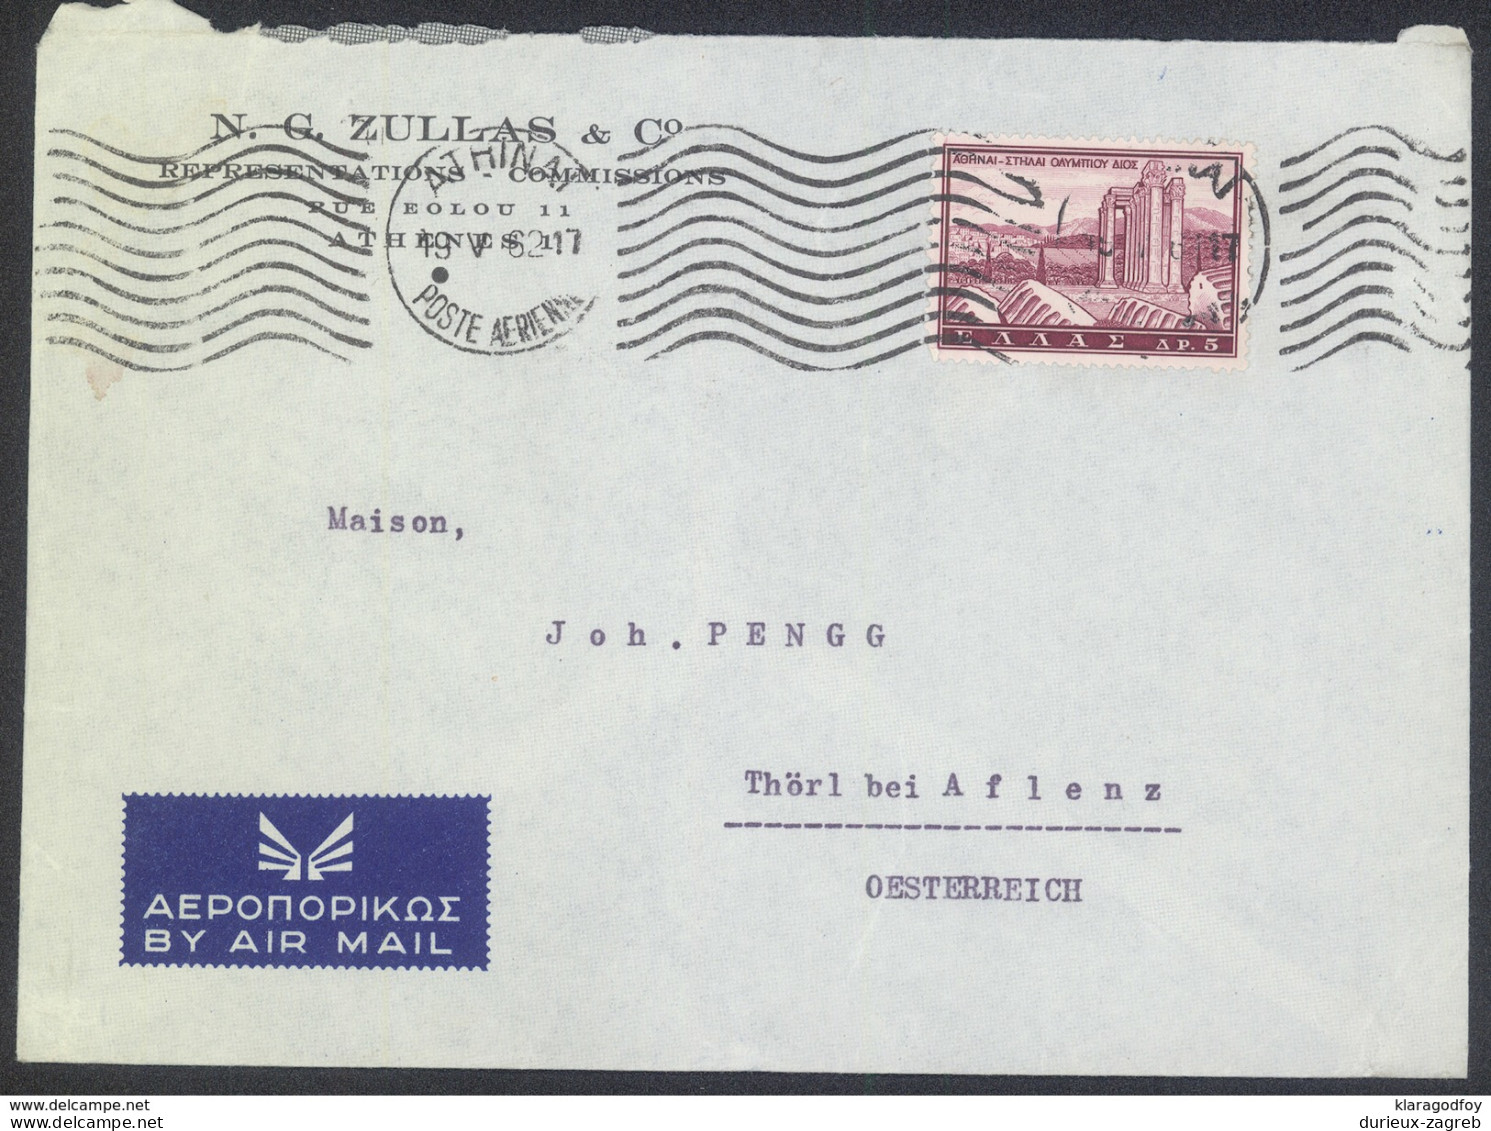 Greece, N. G. Zulas & Co Company Airmail Letter Cover Travelled 1962 Athina Pmk B170410 - Cartas & Documentos